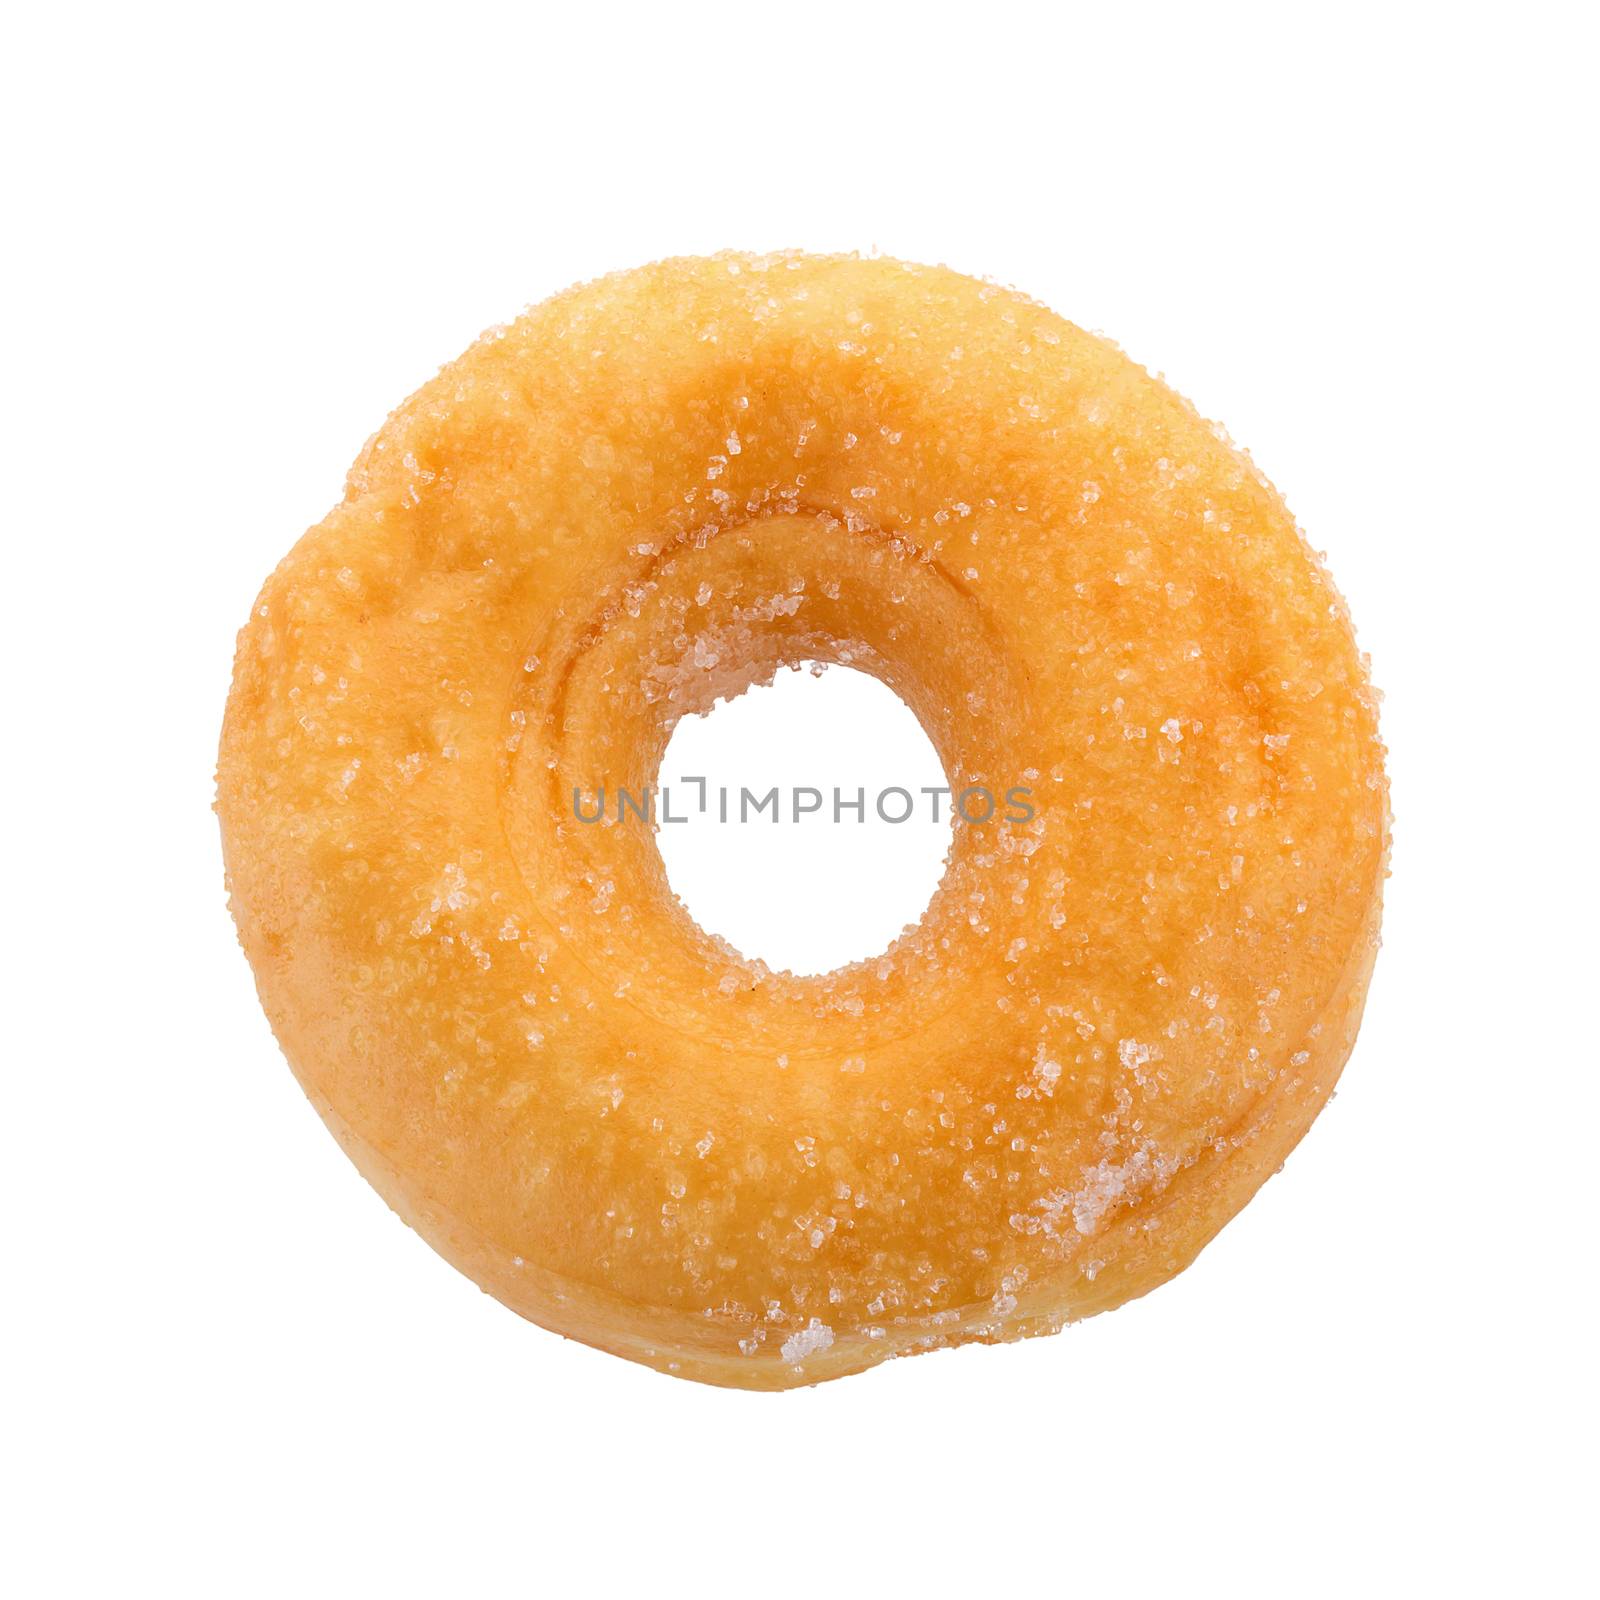 Sugary donut isolated on a white background by kaiskynet